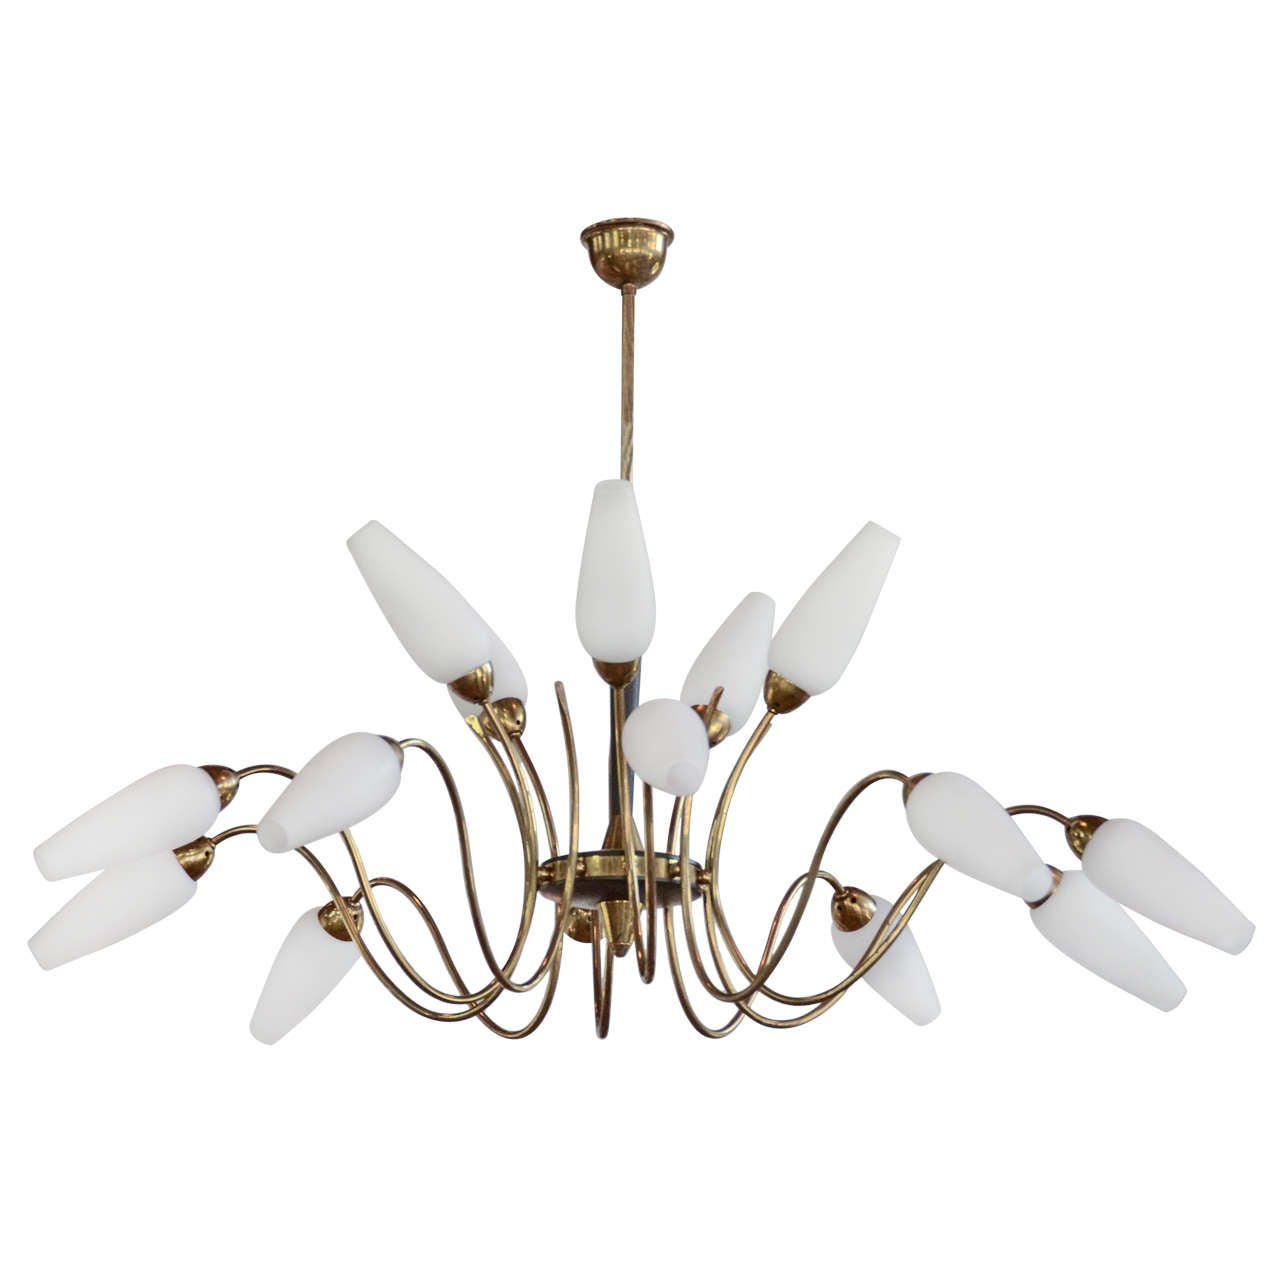 French Mid-Century Brass Chandelier with opaque glass shades